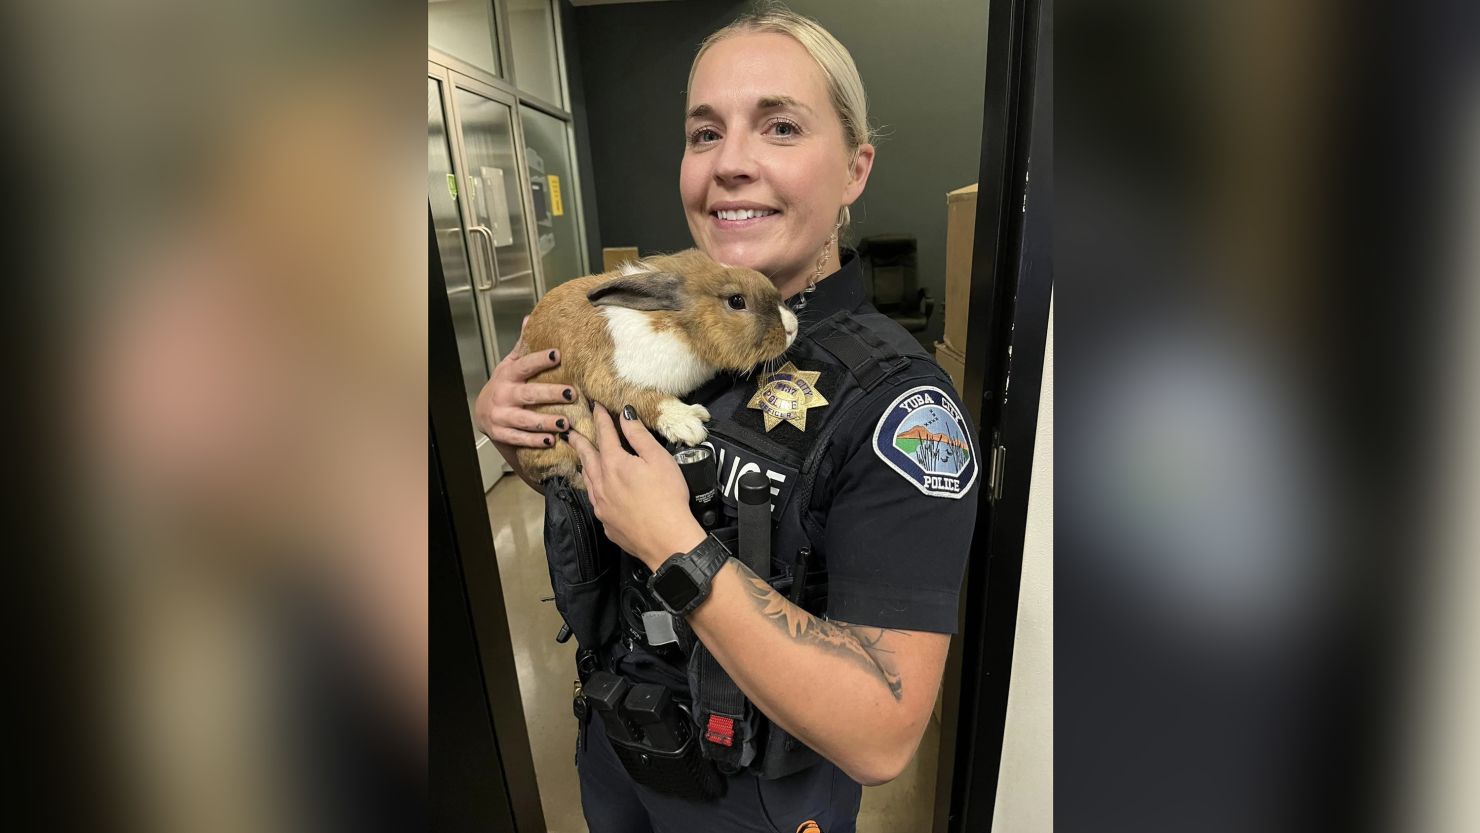 A new recruit has joined the police department in Yuba City, California: a bunny wellness officer, who serves to improve the department's mental health. 